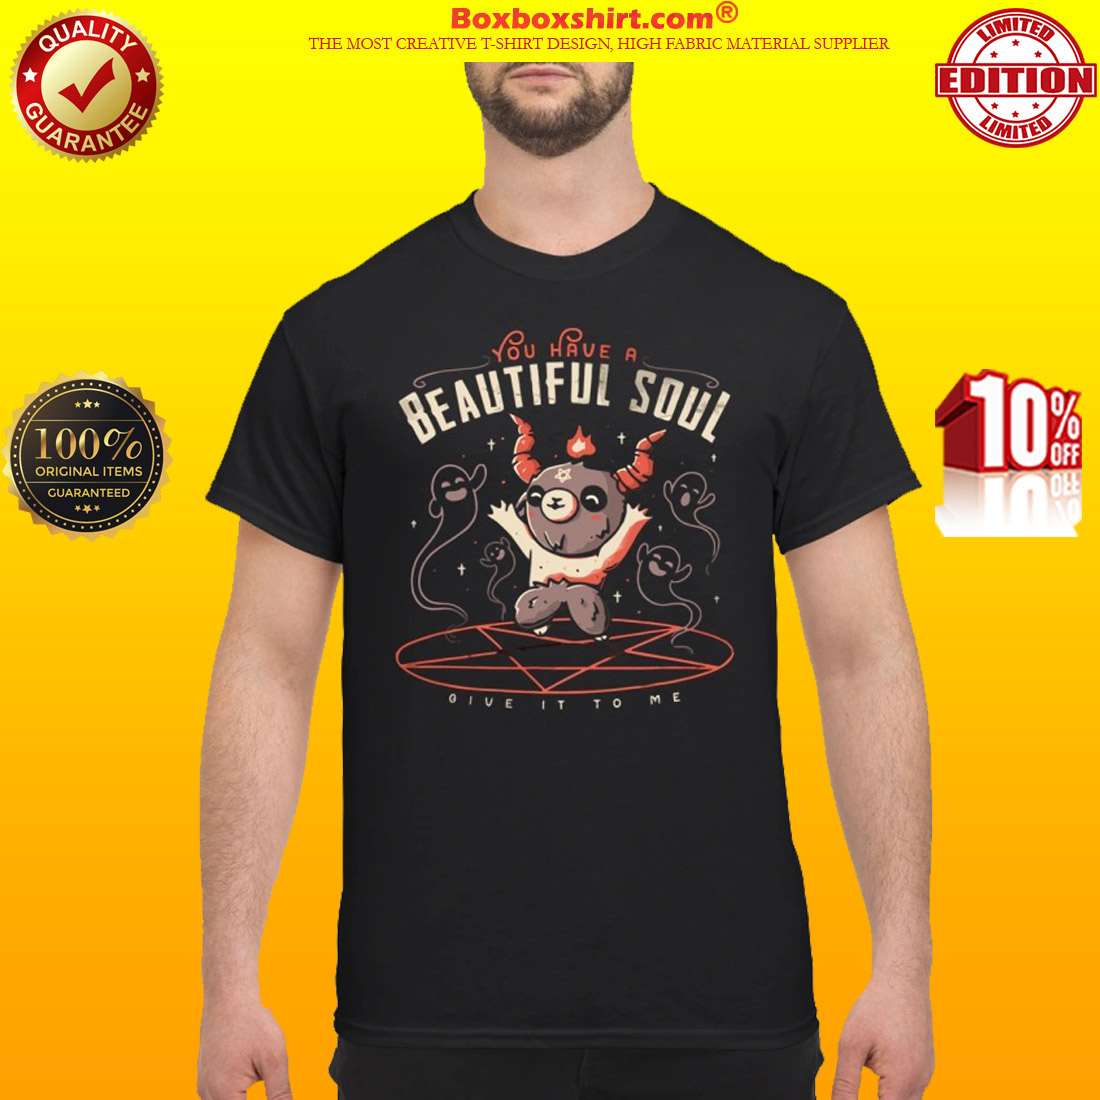 Baby baphomet satan you have a beautiful soul give it to me classic shirt